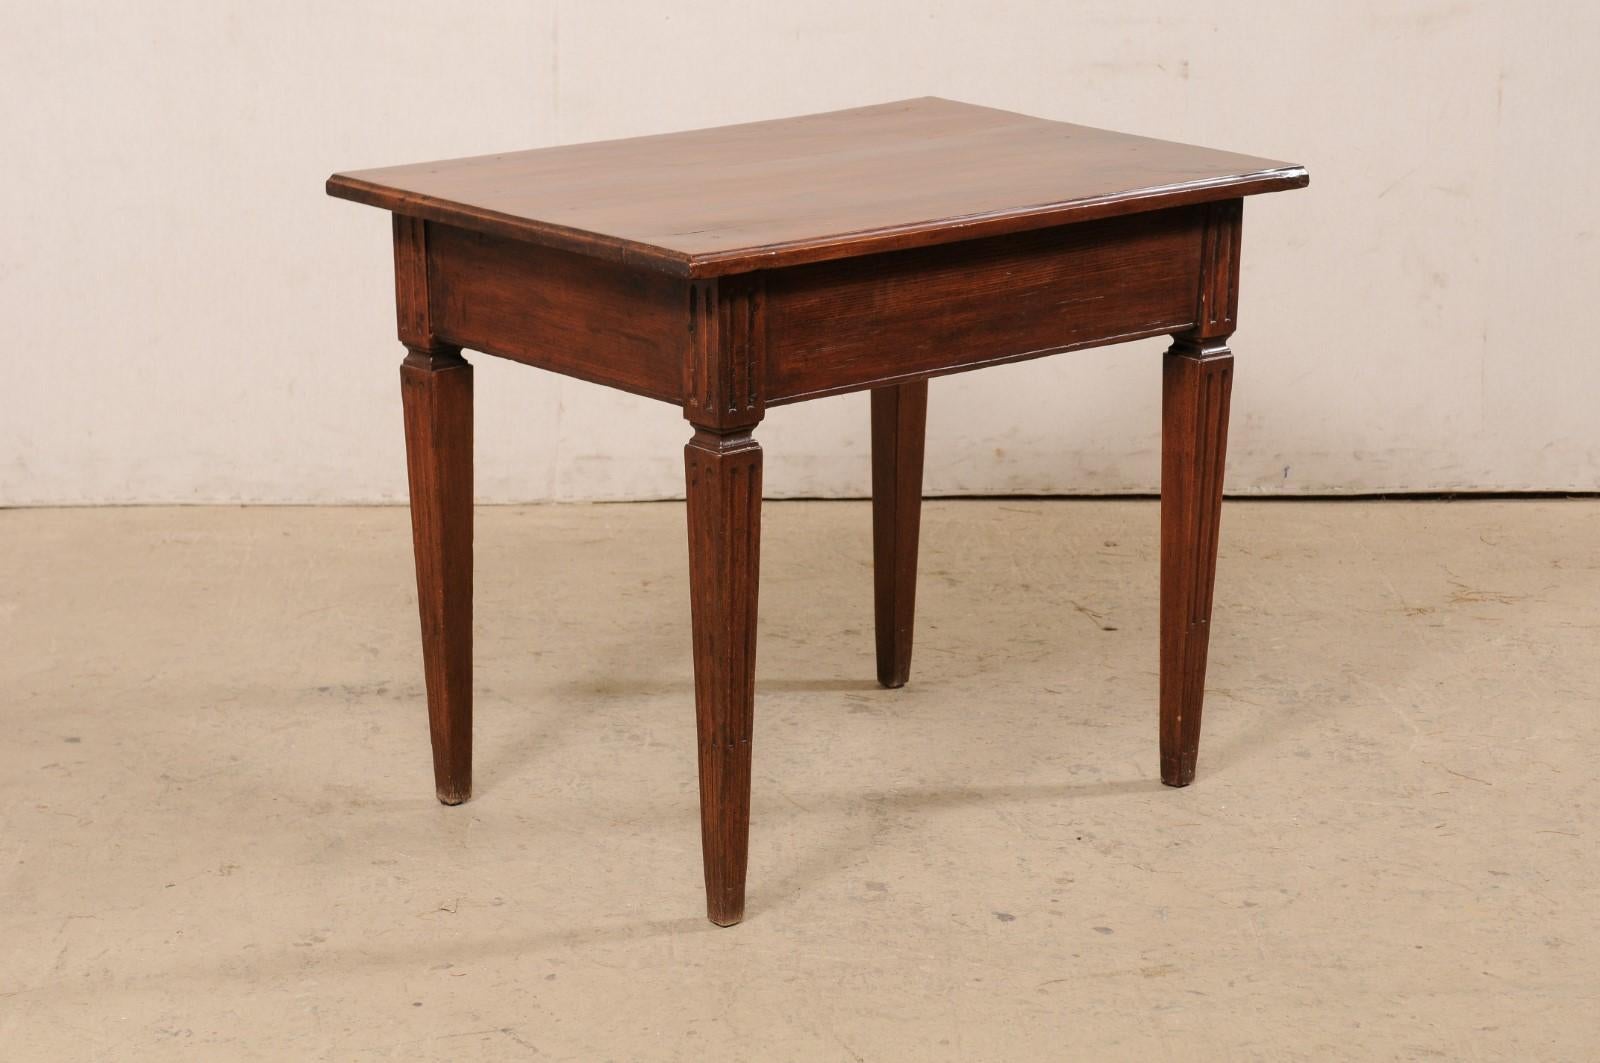 Italian Small Wooden Table w/Drawer Presented on Flute-Carved Legs, 19th C. For Sale 3